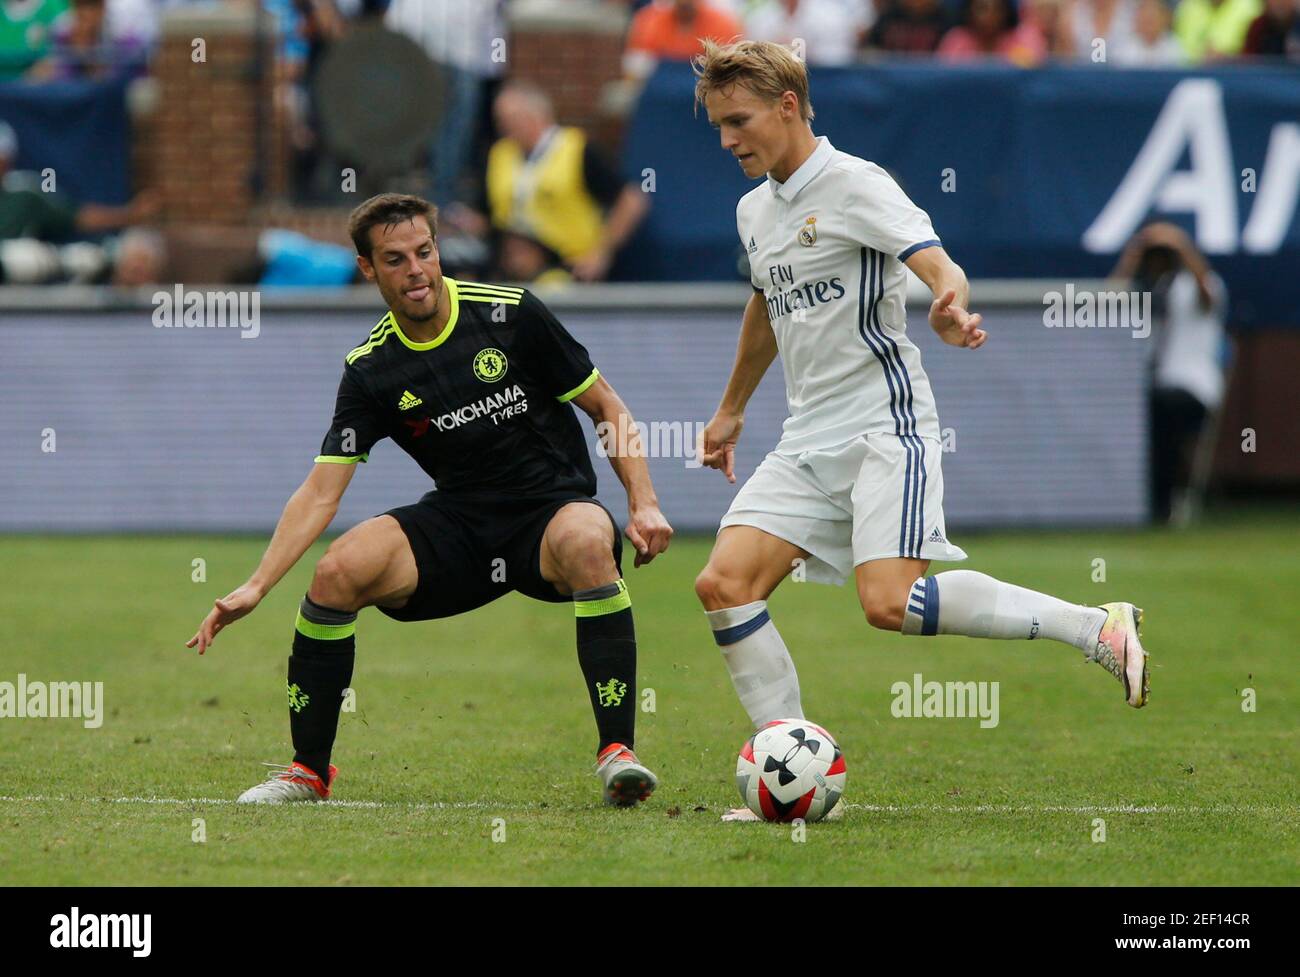 Football Soccer Real Madrid V Chelsea International Champions Cup Michigan Stadium Ann Arbor United States Of America 16 17 30 7 16 Real Madrid S Martin Odegaard In Action With Chelsea S